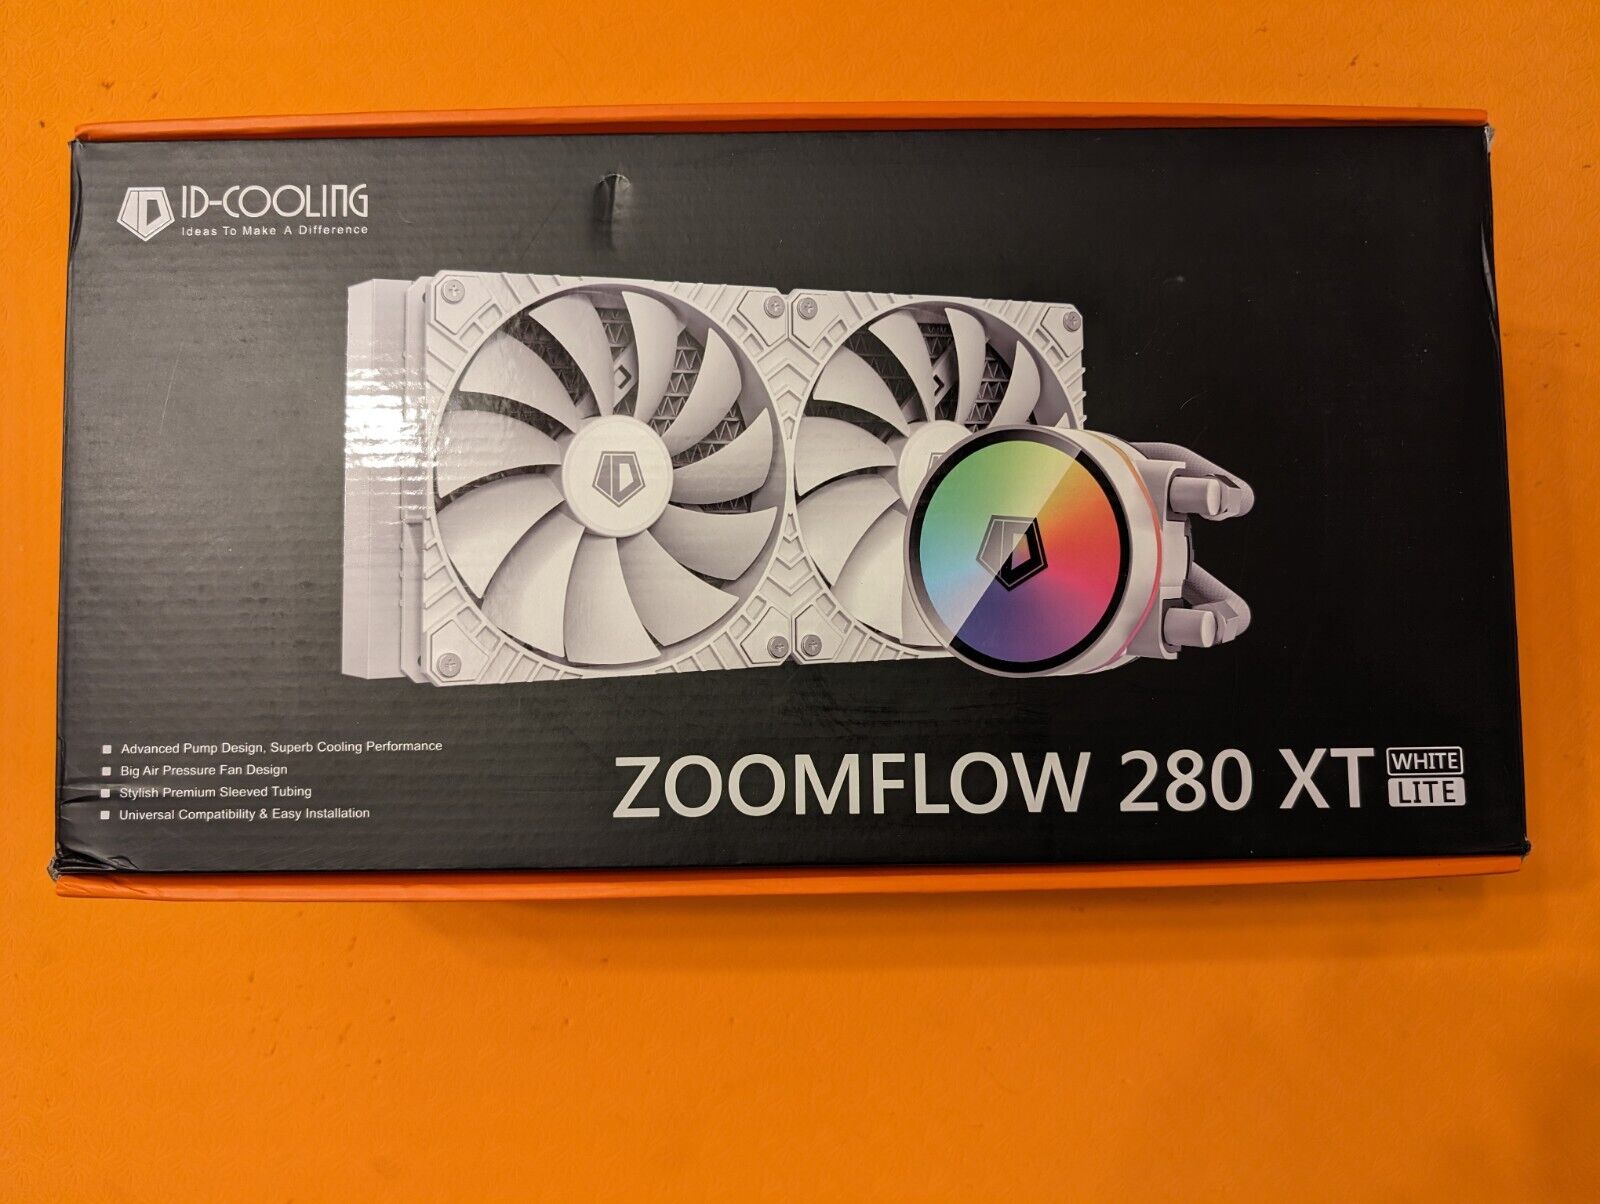 ID-COOLING ZOOMFLOW 280XT Lite White 280MM AIO RGB Radiator Cooler